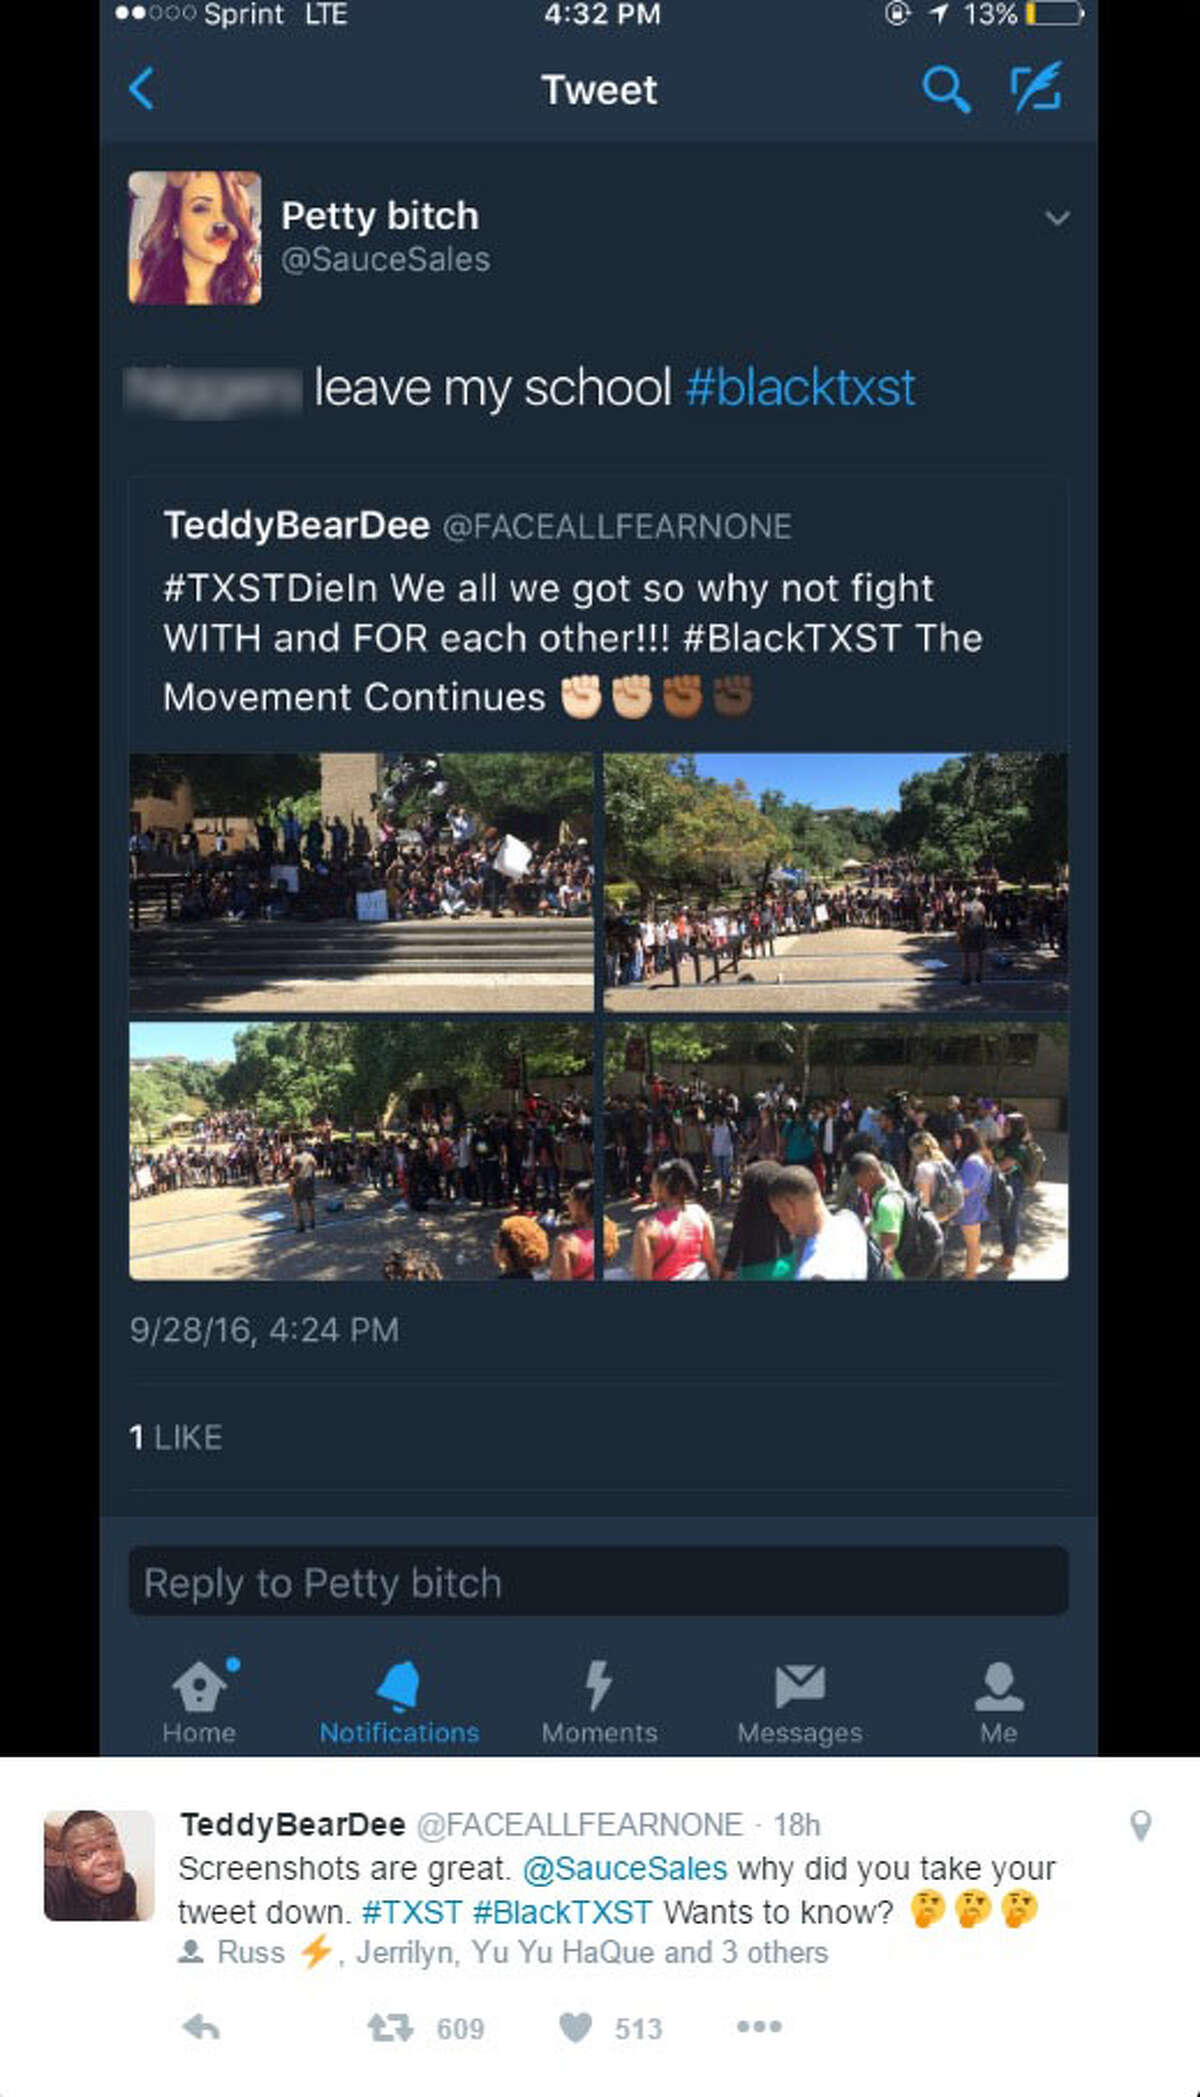 Texas State University officials are investigating after a racist tweet was made geared toward black students at the university Sept. 29, 2016.